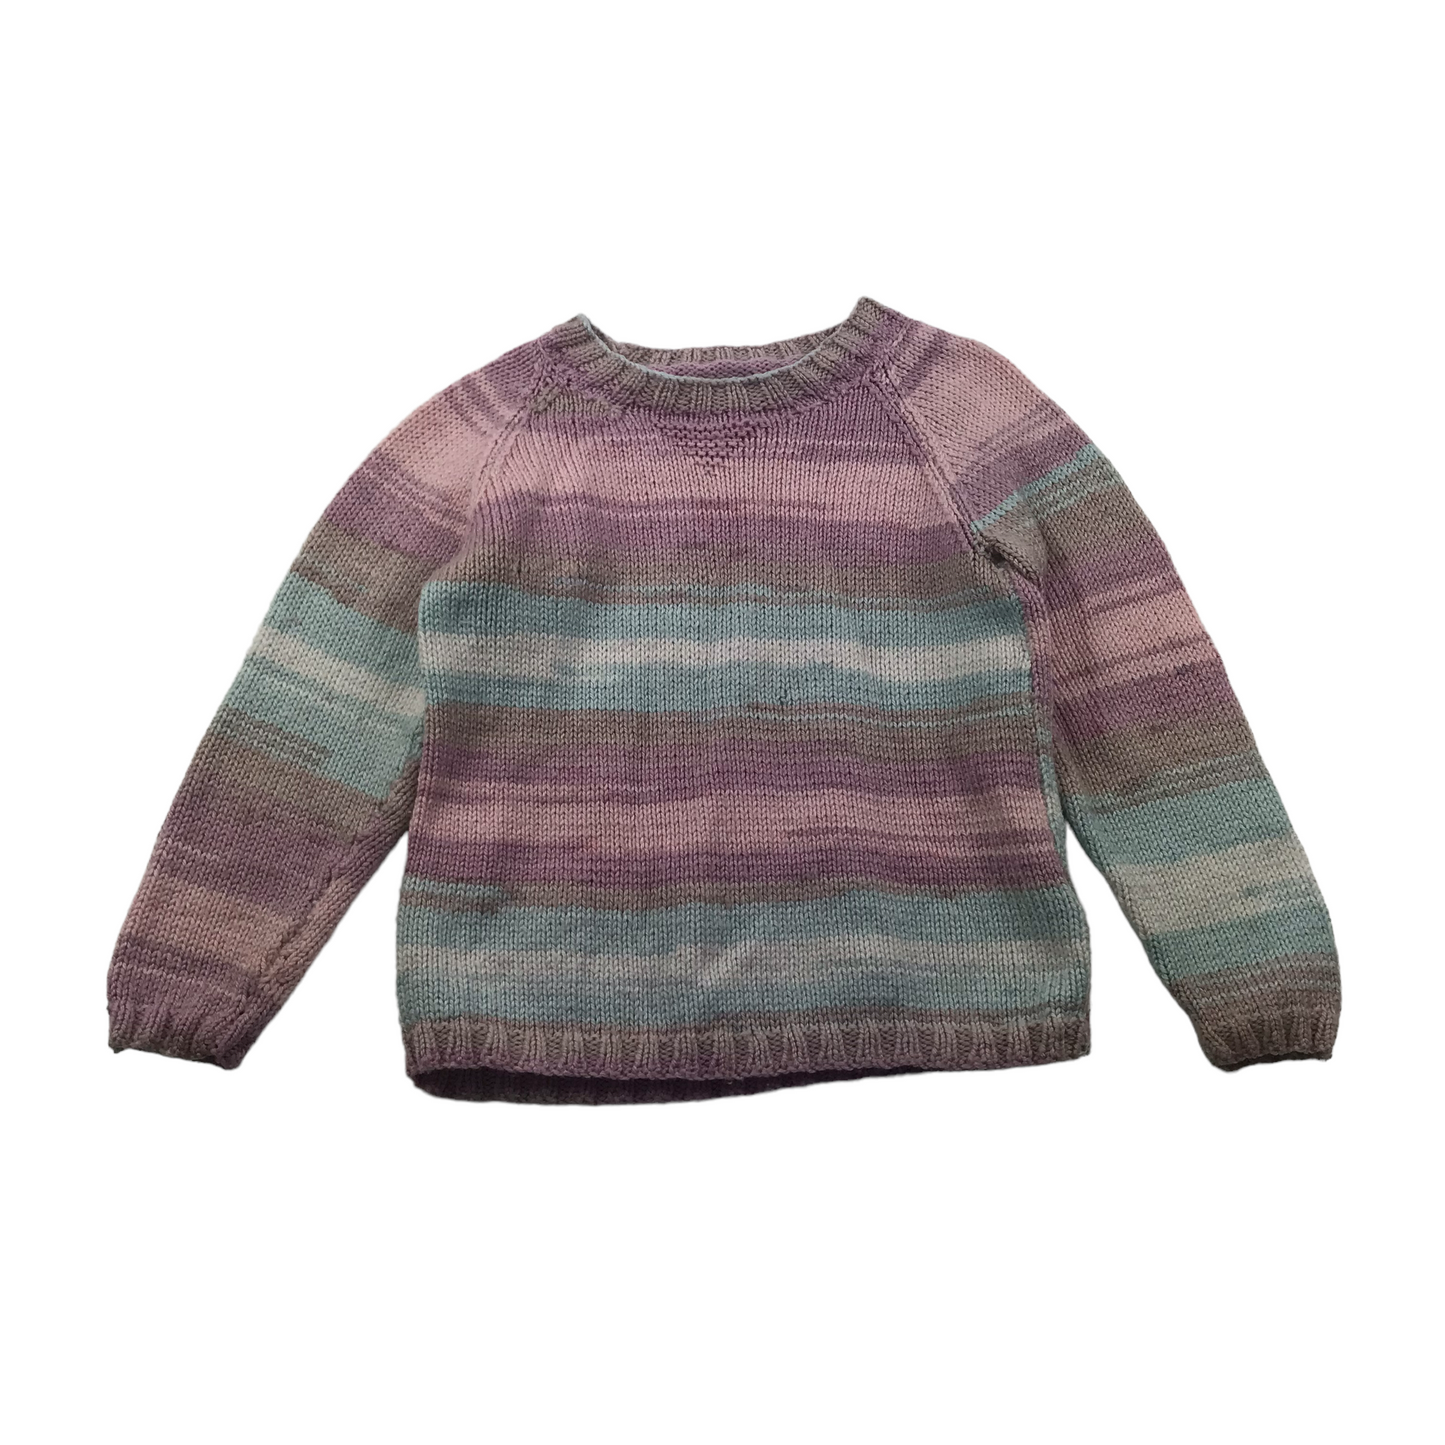 Hand Knitted Purple Pink and Blue Pattern Jumper Age 5